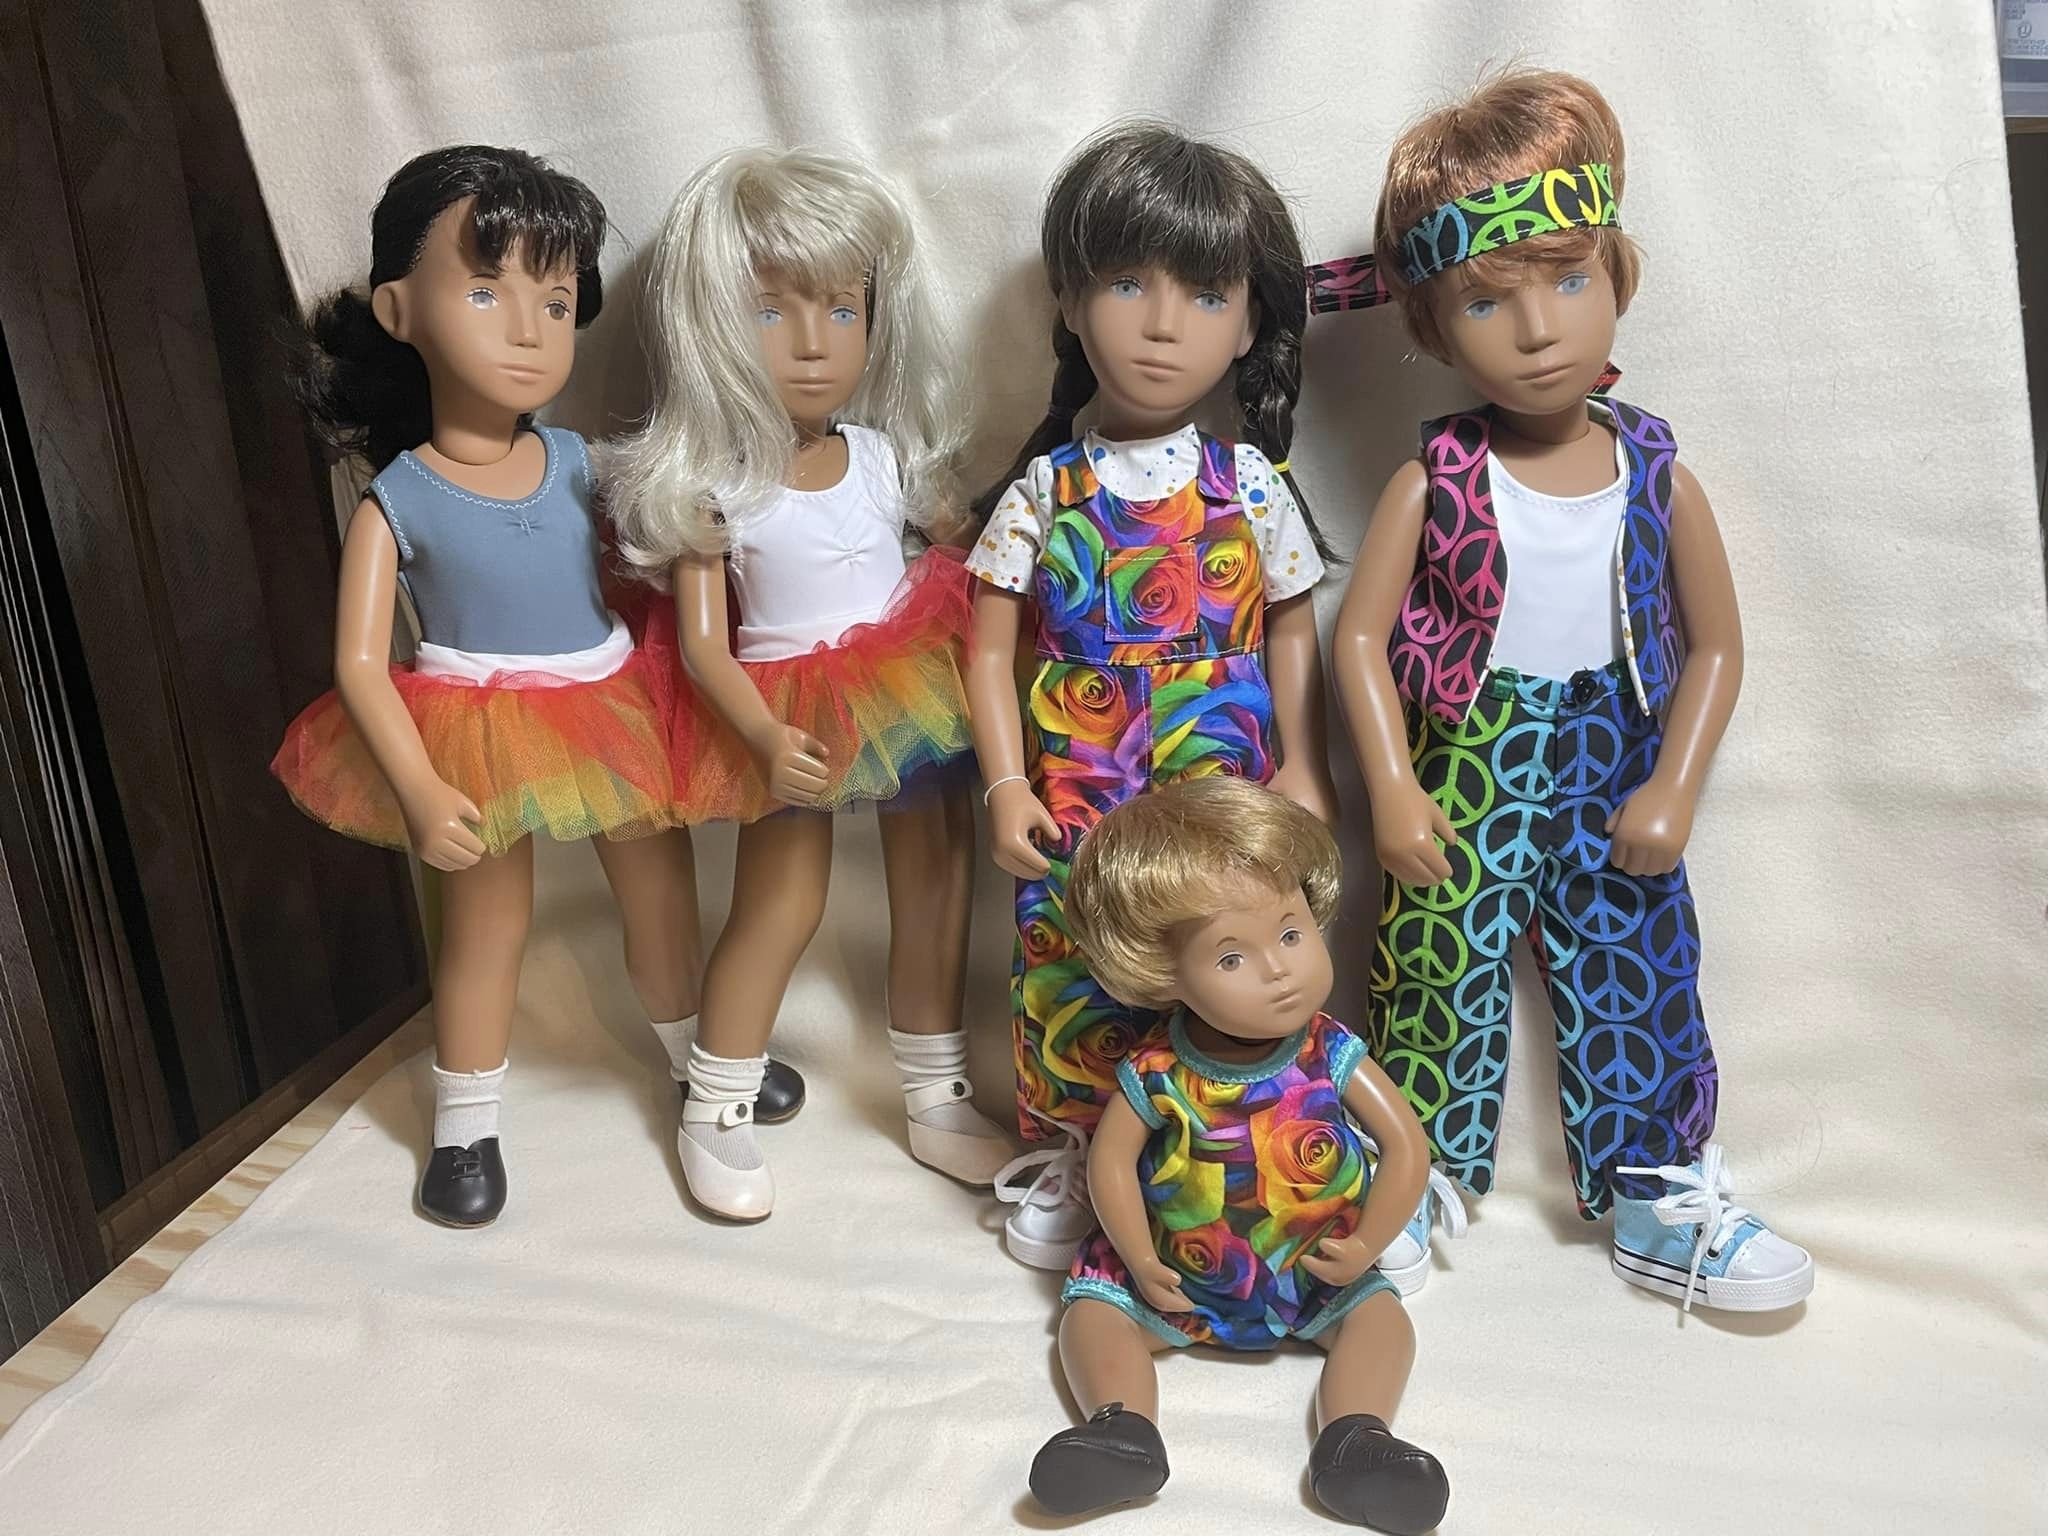 Five Sasha Morgenthaler dolls wearing rainbow-themed outfits